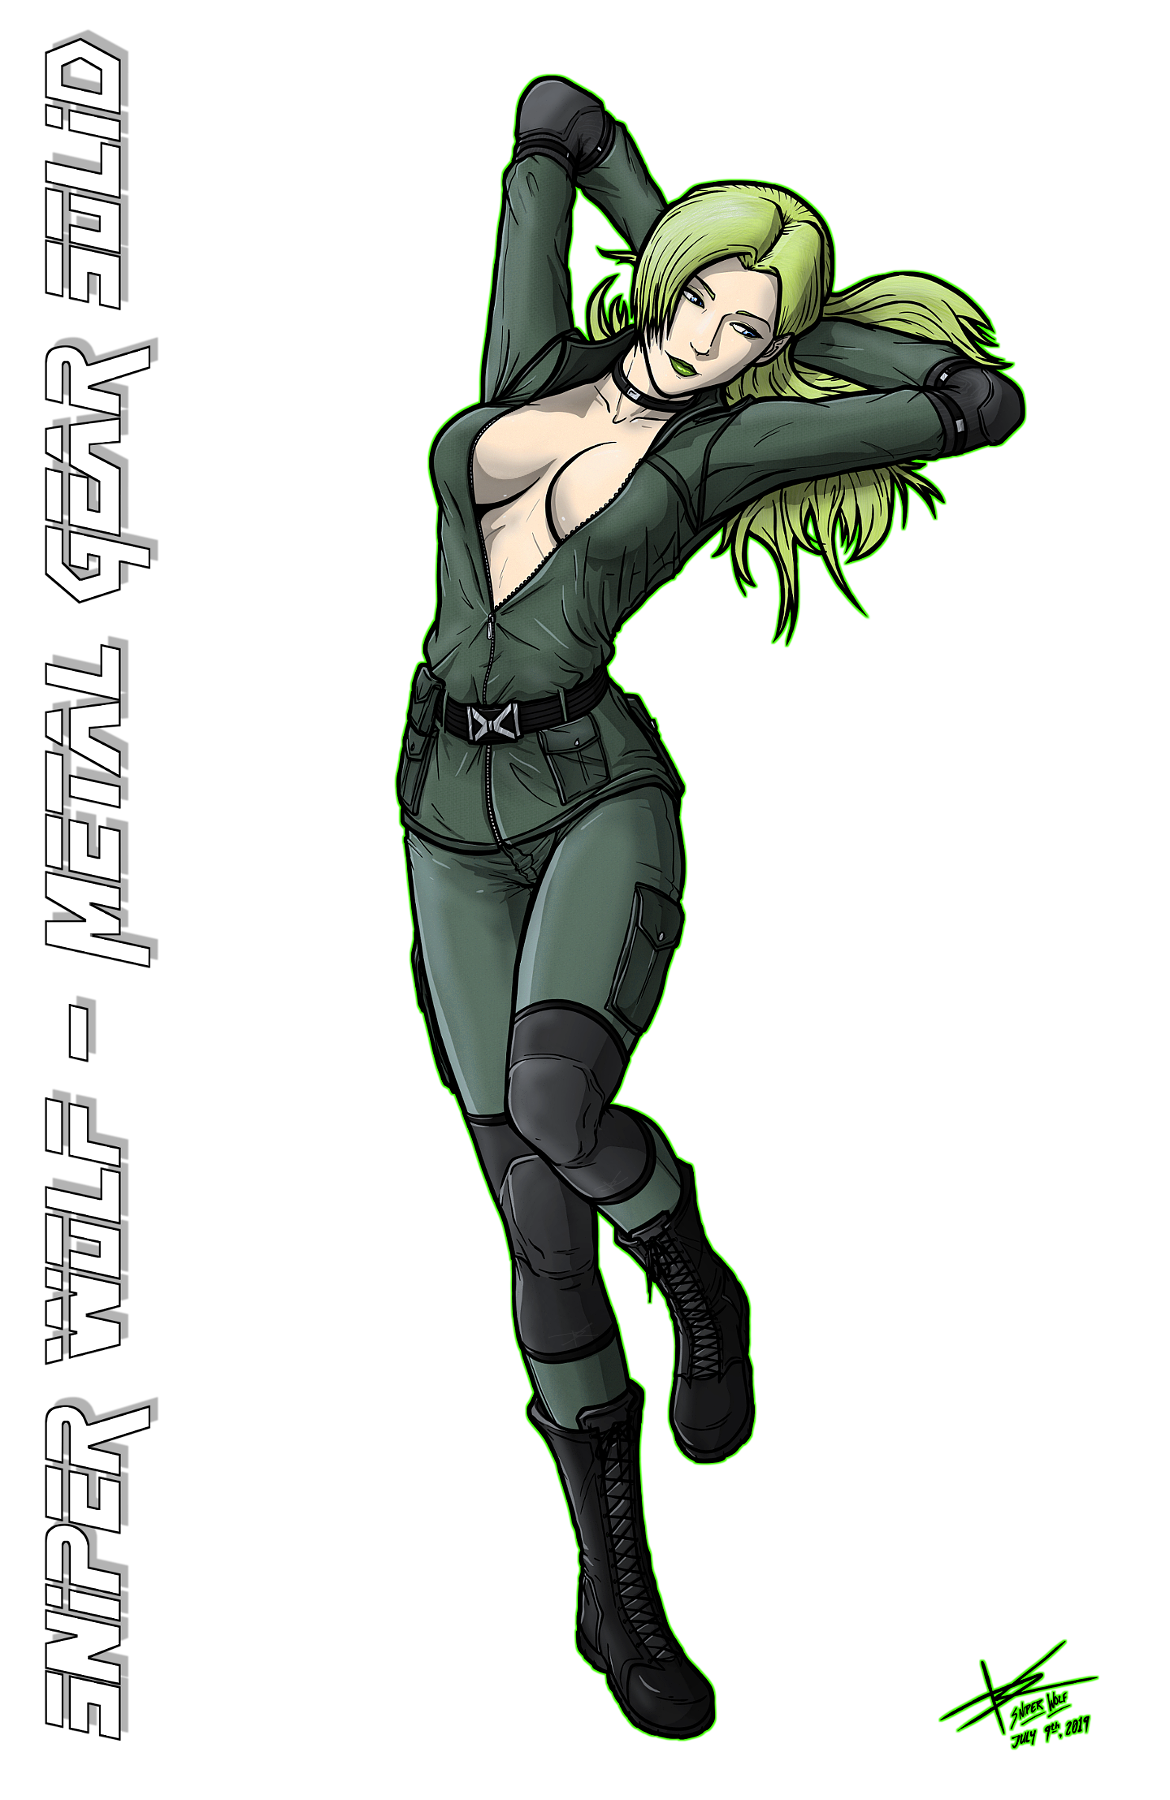 Wolf Drawing png download - 417*600 - Free Transparent Metal Gear